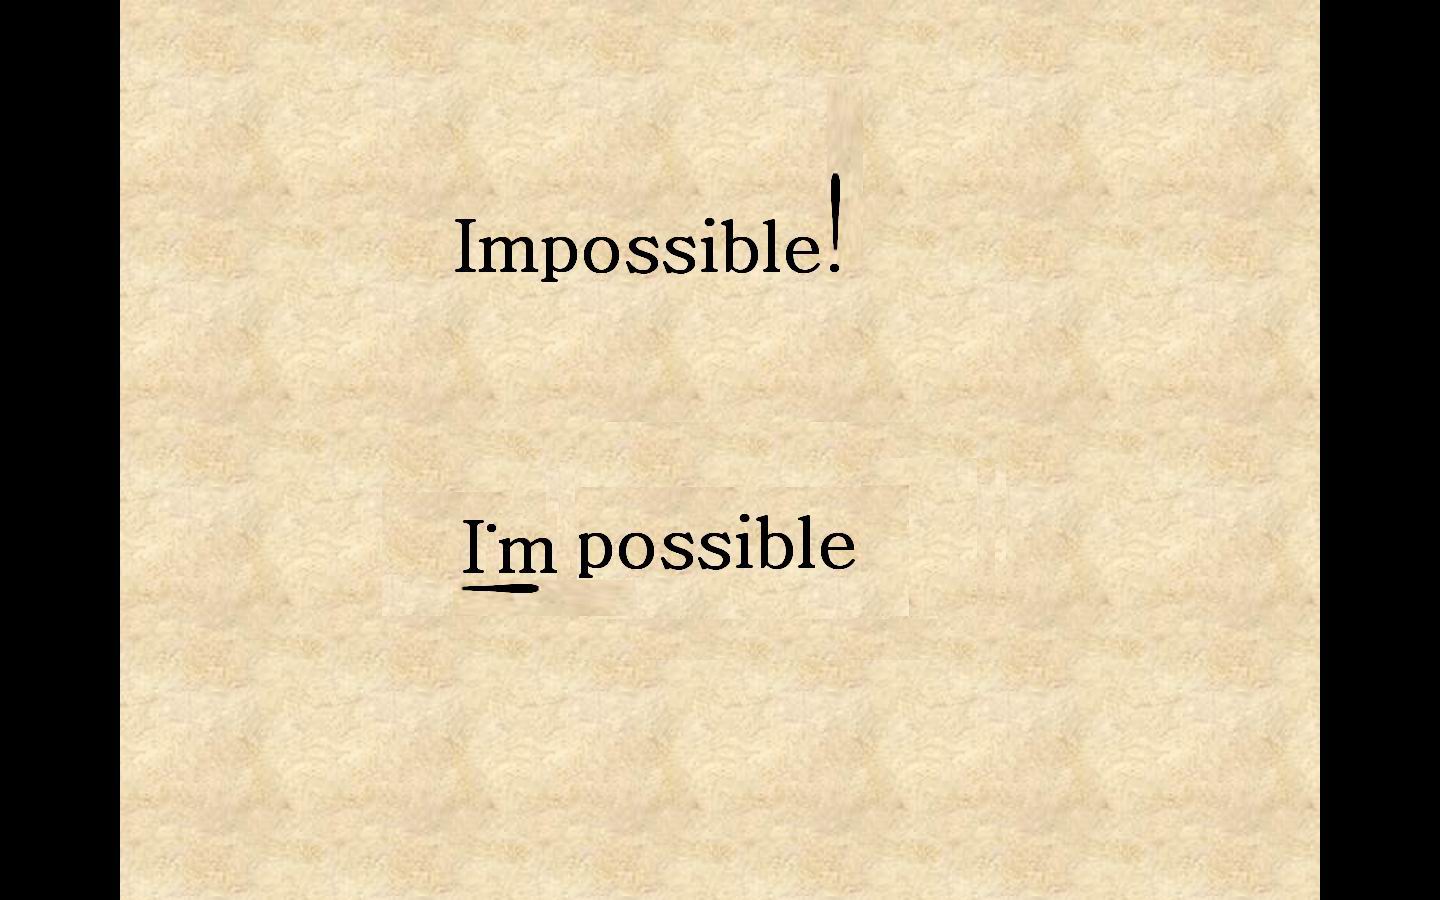 Impossible possible. Impossible. Картинка Impossible possible. Impossible надпись. Impossible possible обои.